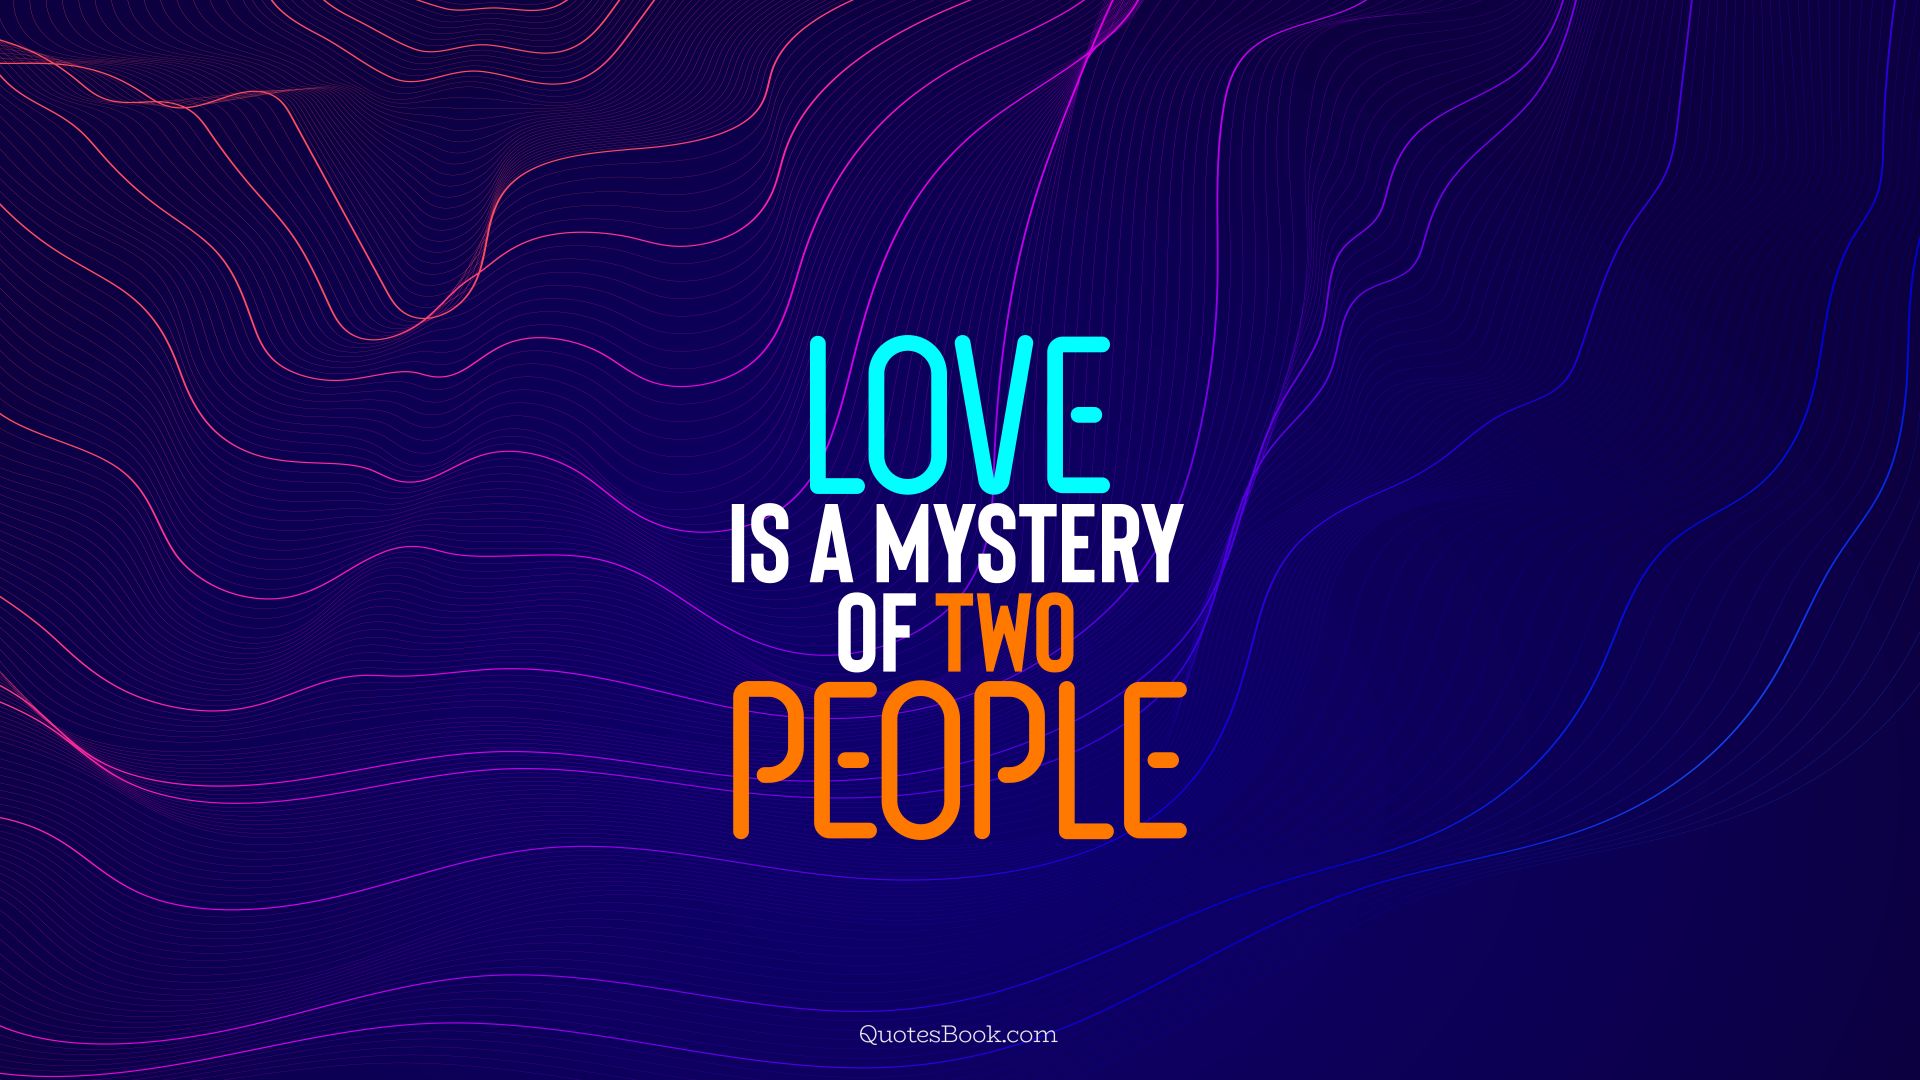 Love is a mystery of two people. - Quote by QuotesBook